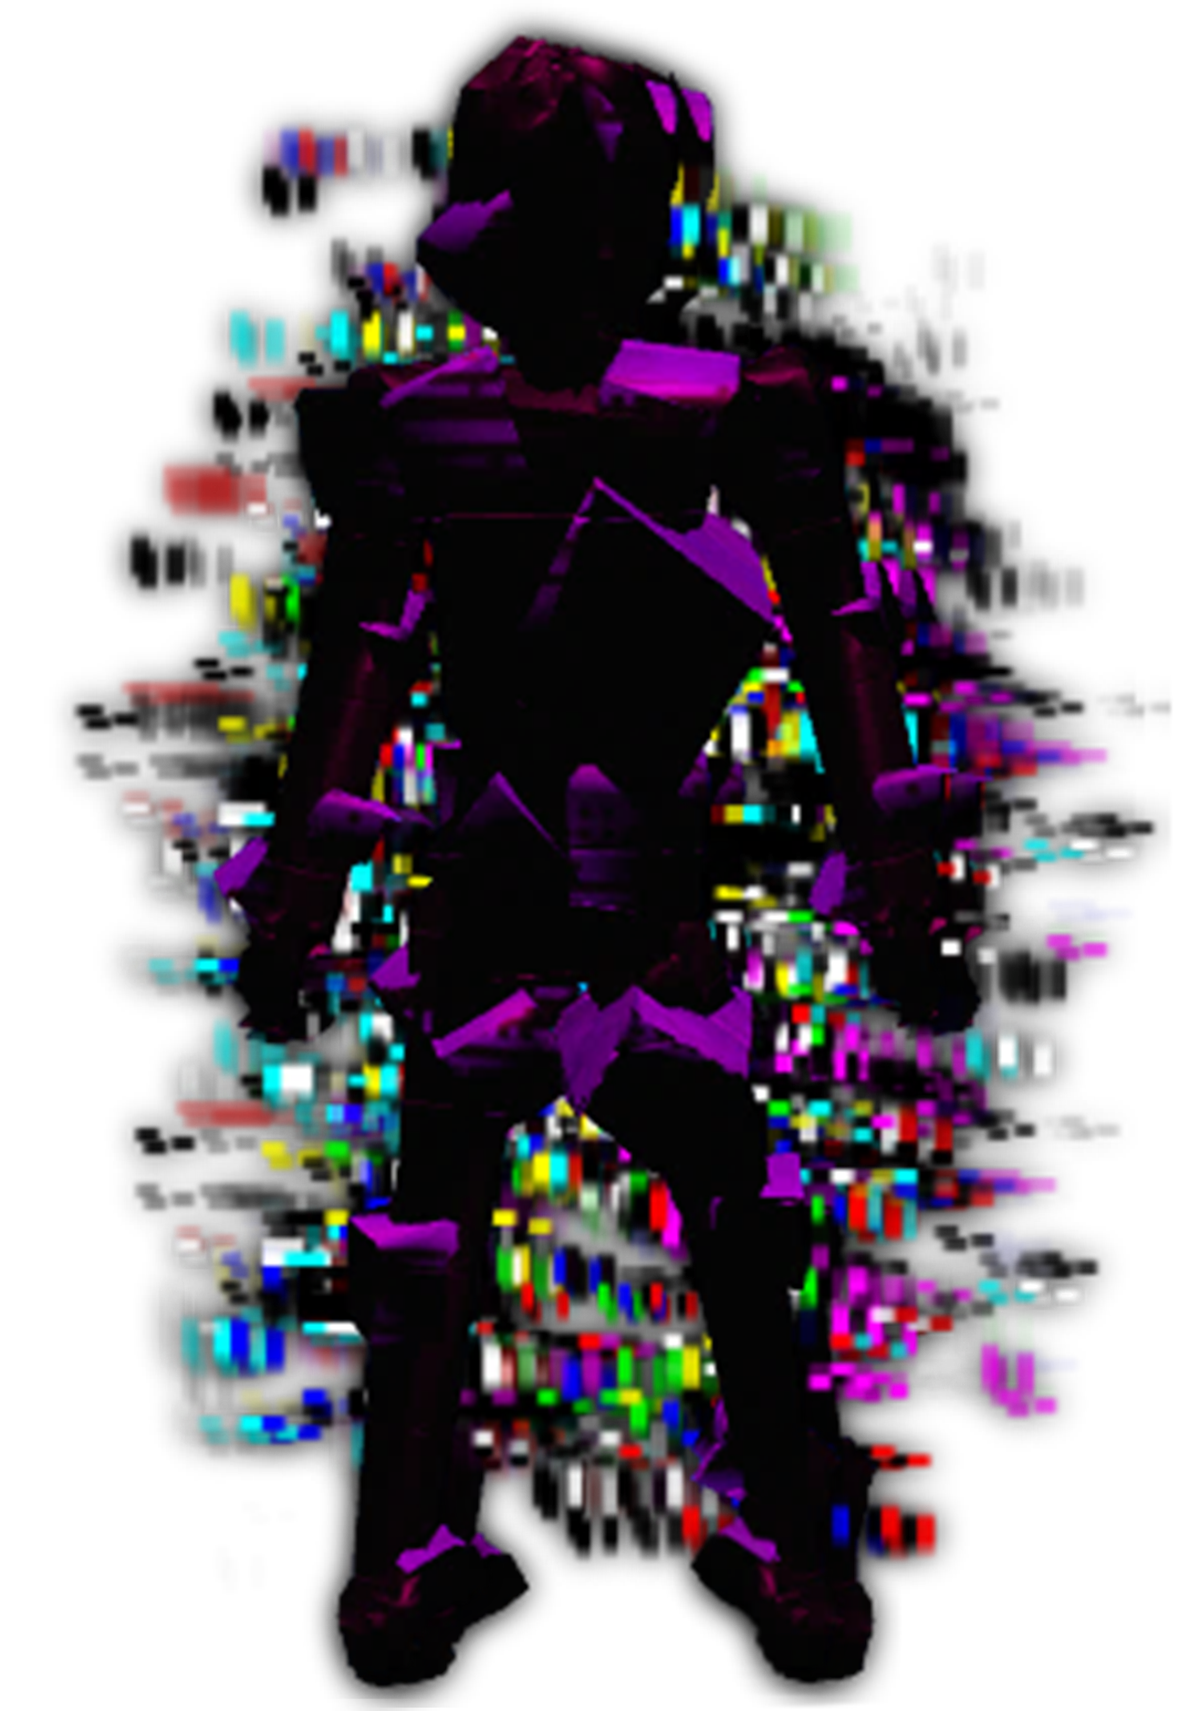 Roblox Doors Glitch V2 Full Body Png by DemonGod2022 on DeviantArt